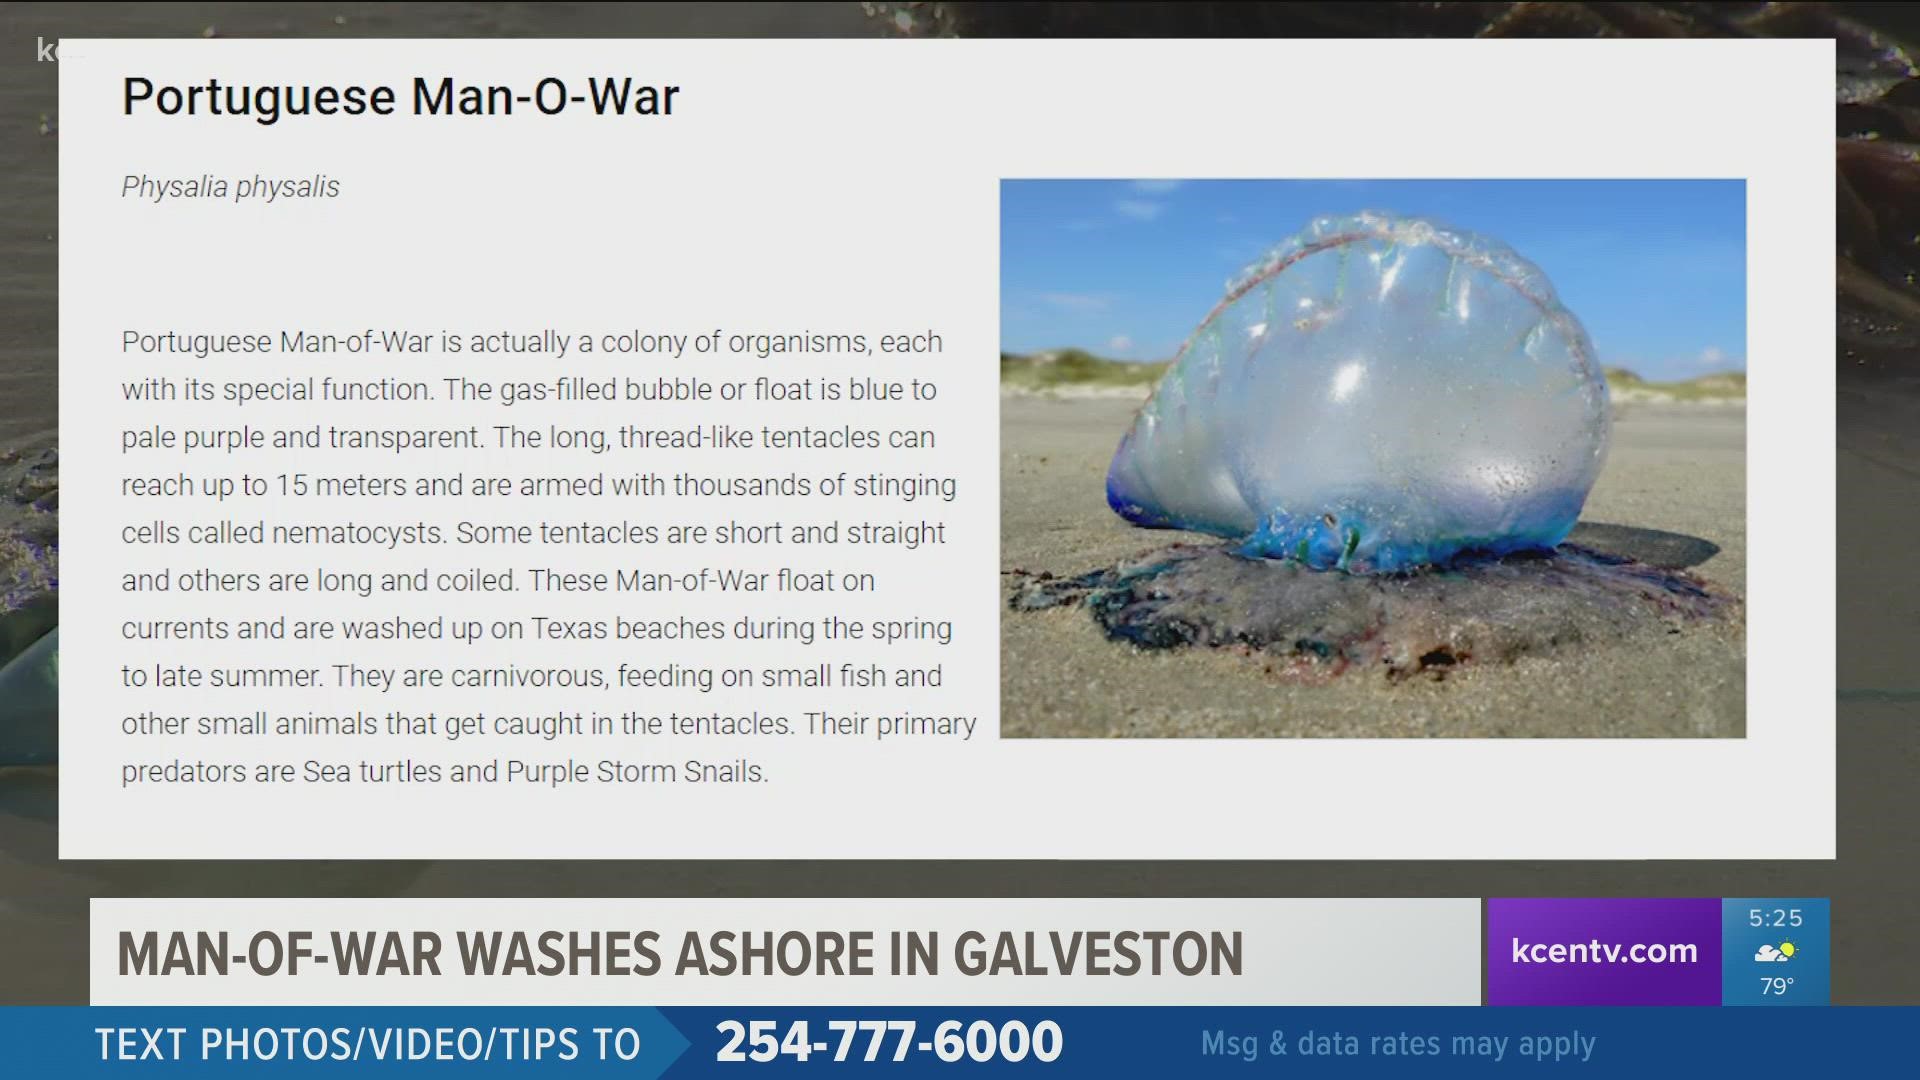 The clear blubber creature is actually a Portuguese Man-of-War that has been surfacing on Galveston beaches.